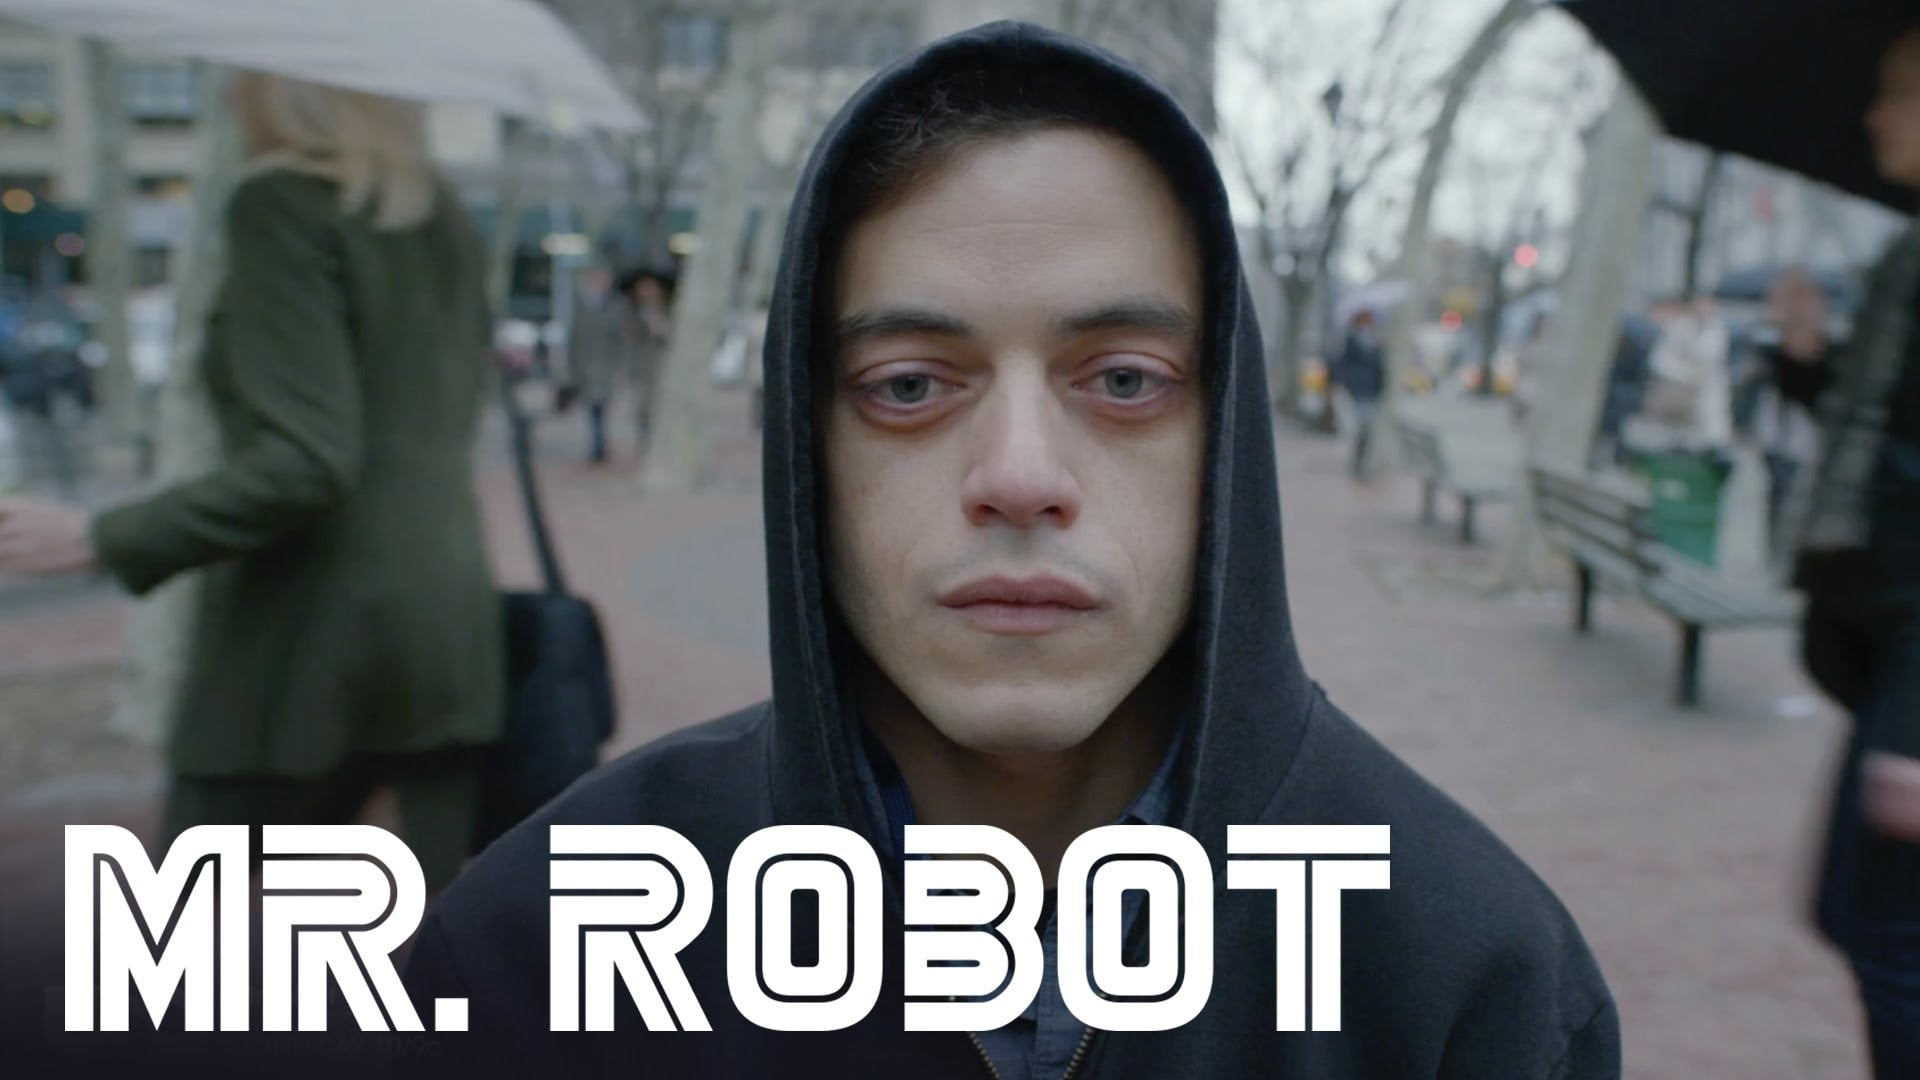 man in black hoodie with Mr. Robot text